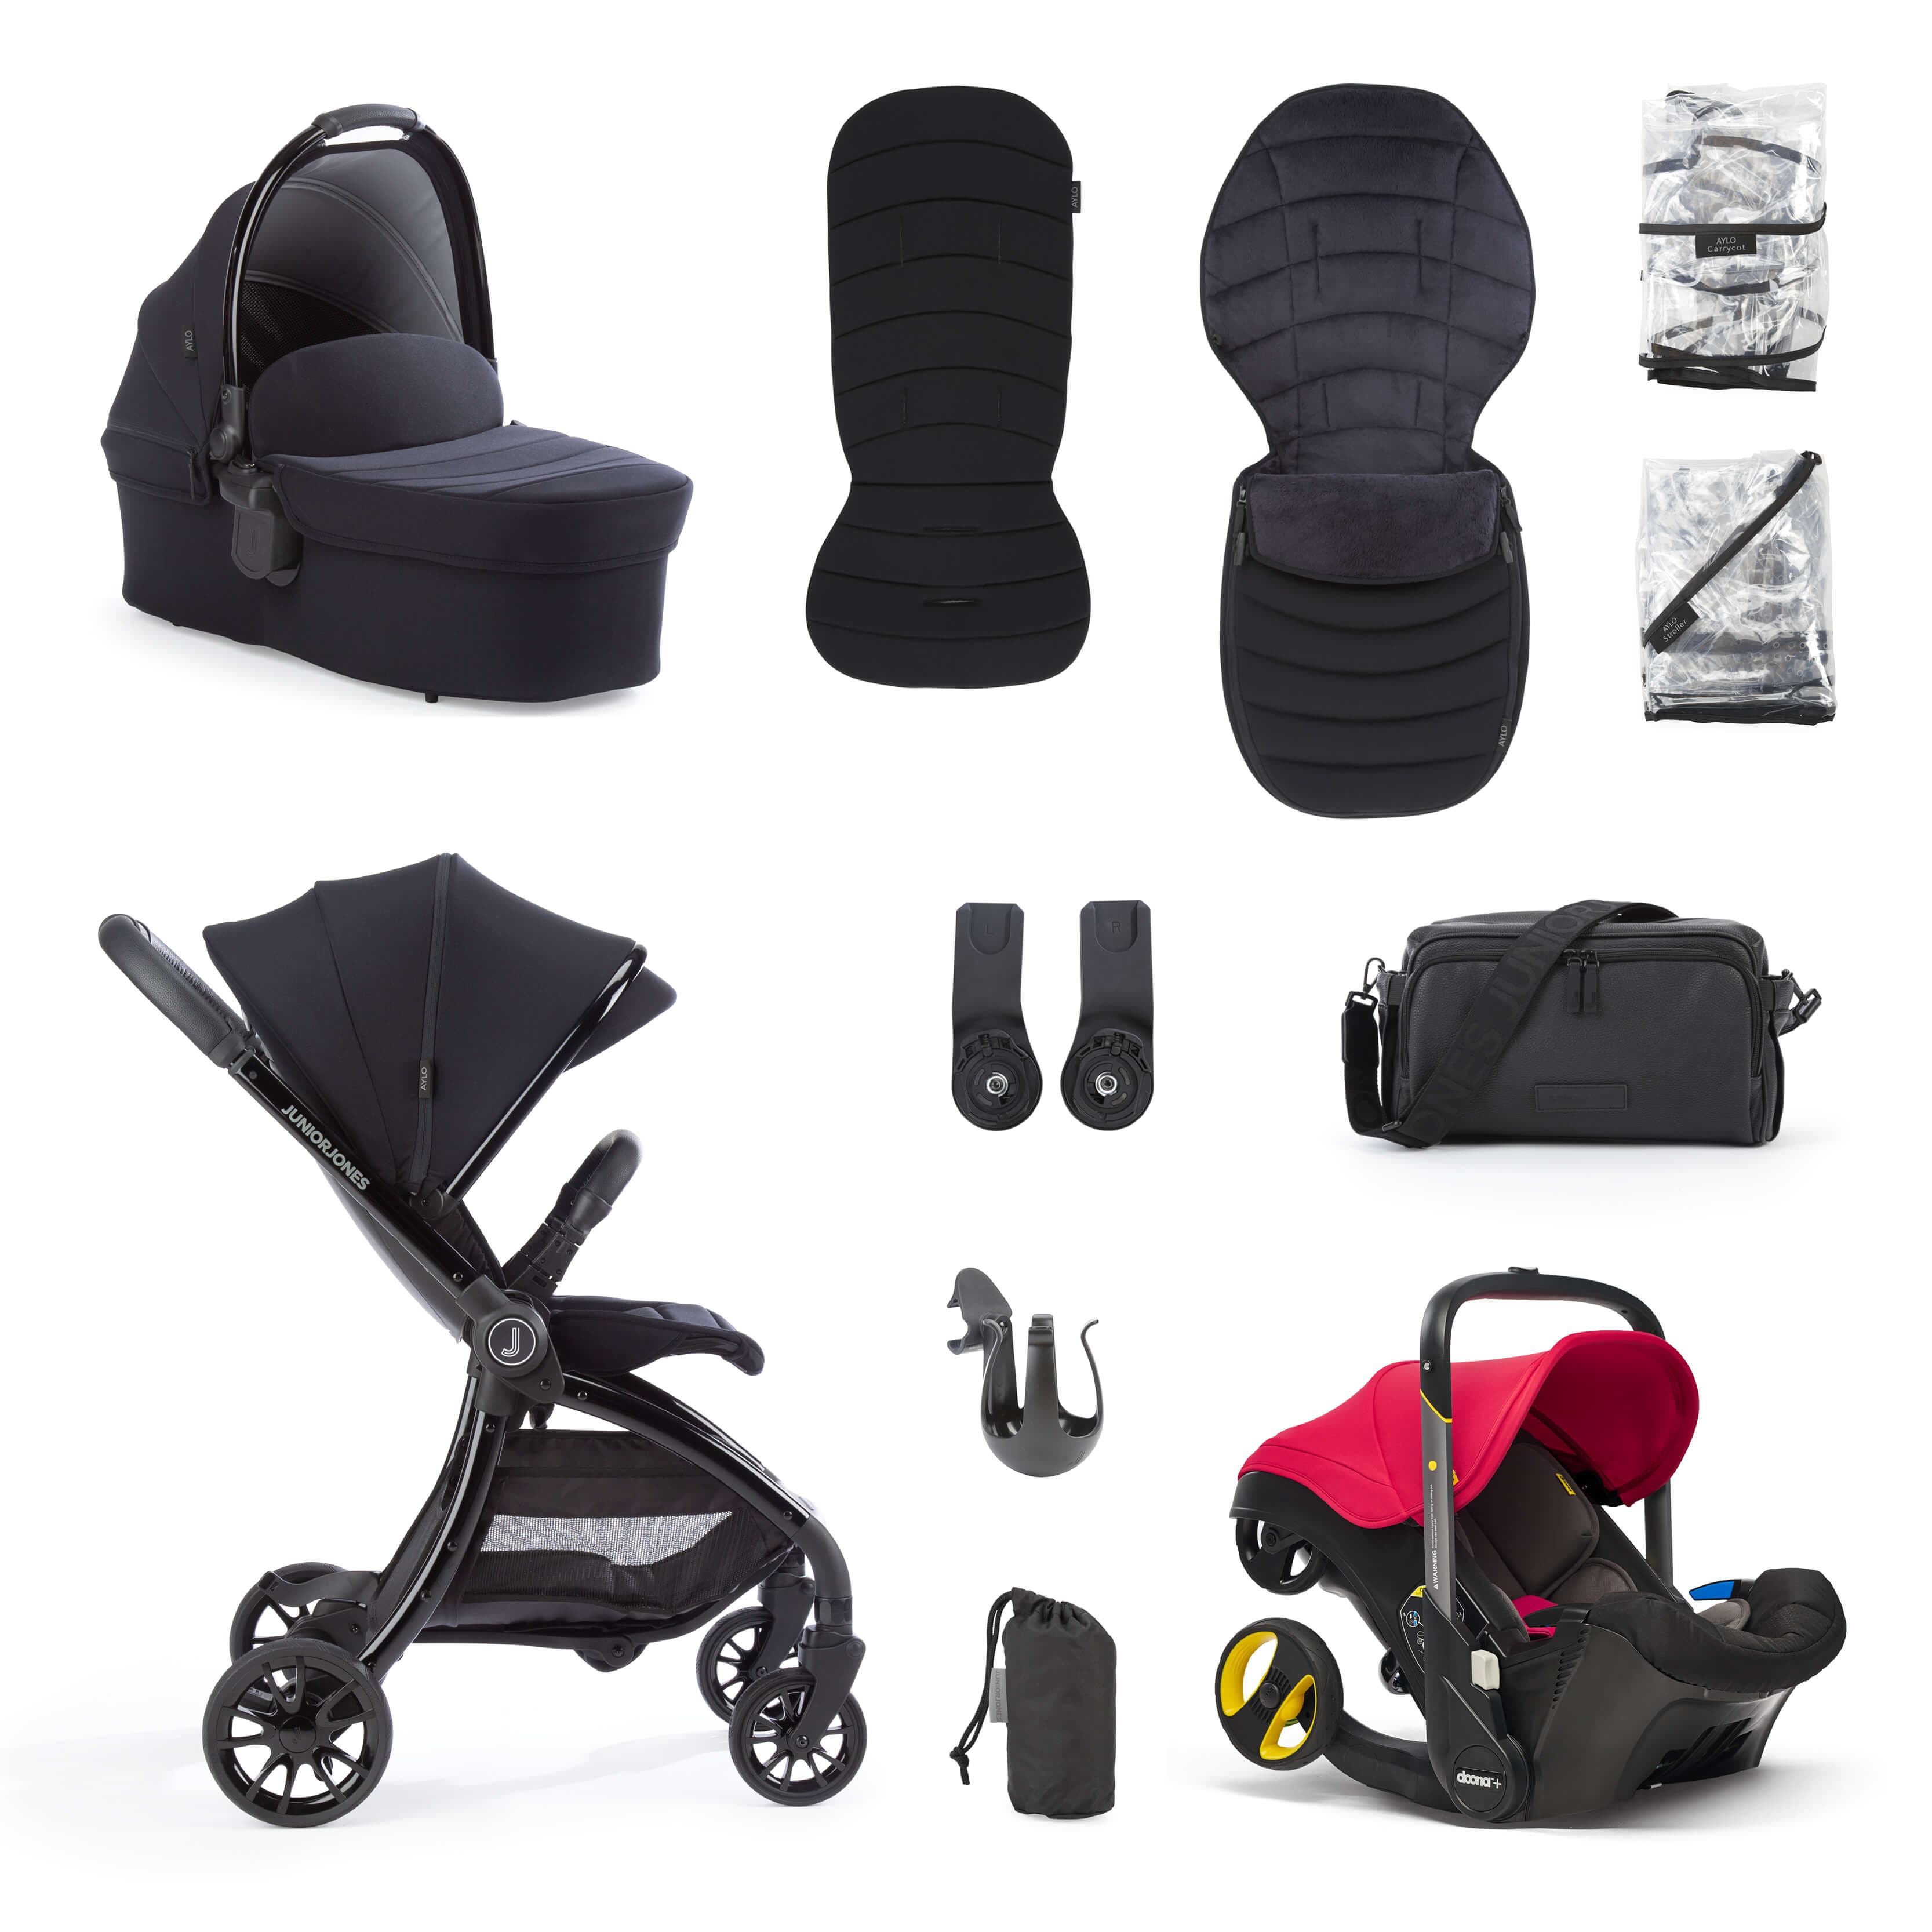 Junior Jones Aylo Rich Black 11pc Travel System inc Doona Flame Red Car Seat - For Your Little One